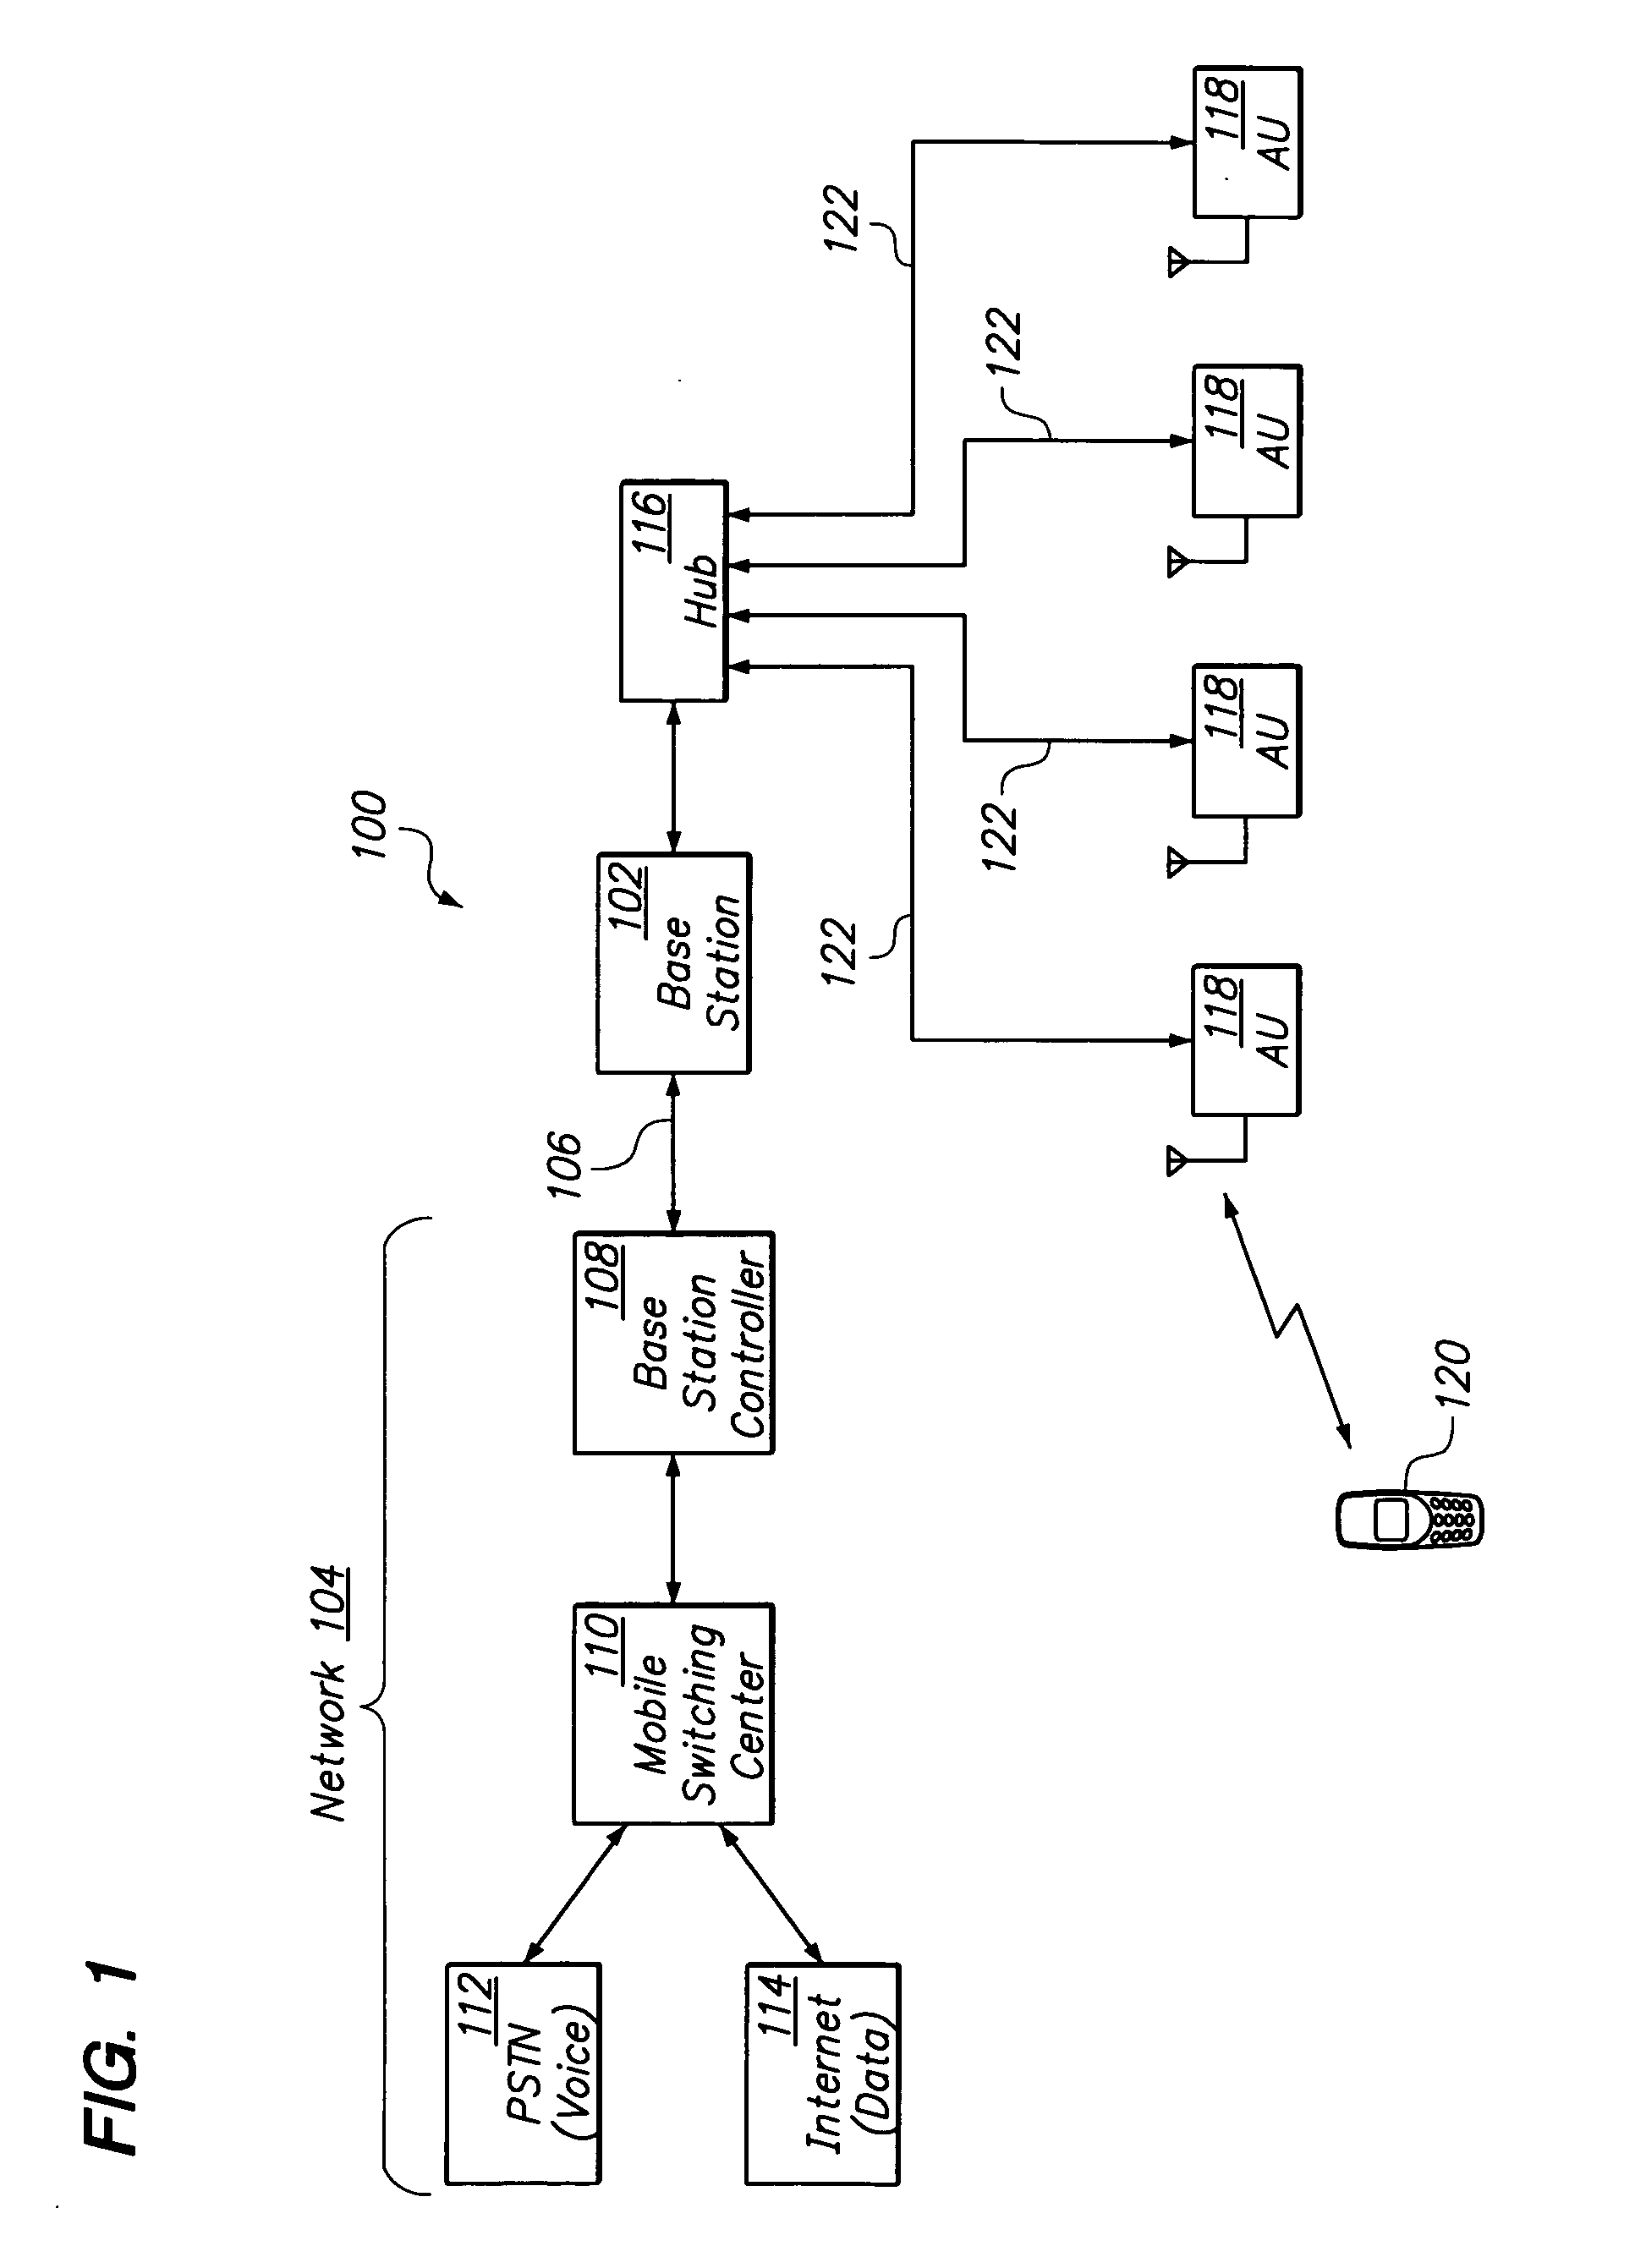 Distributed antenna communications system and methods of implementing thereof